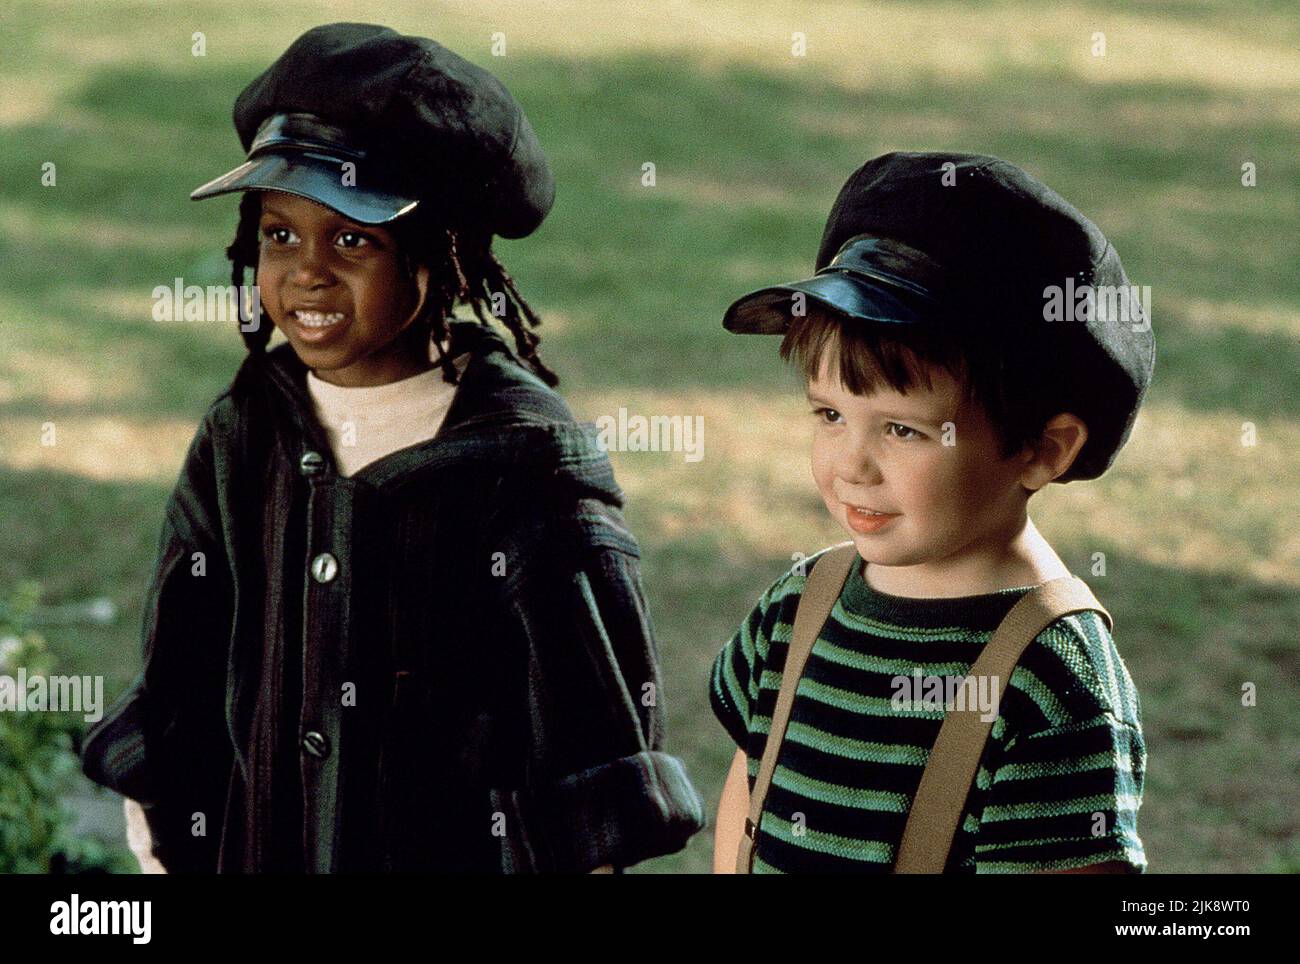 Ross Bugley & Zachary Mabry Film: The Little Rascals (1994) Characters: &  Eugene "Porky" Lee Director: Penelope Spheeris 05 August 1994 **WARNING**  This Photograph is for editorial use only and is the